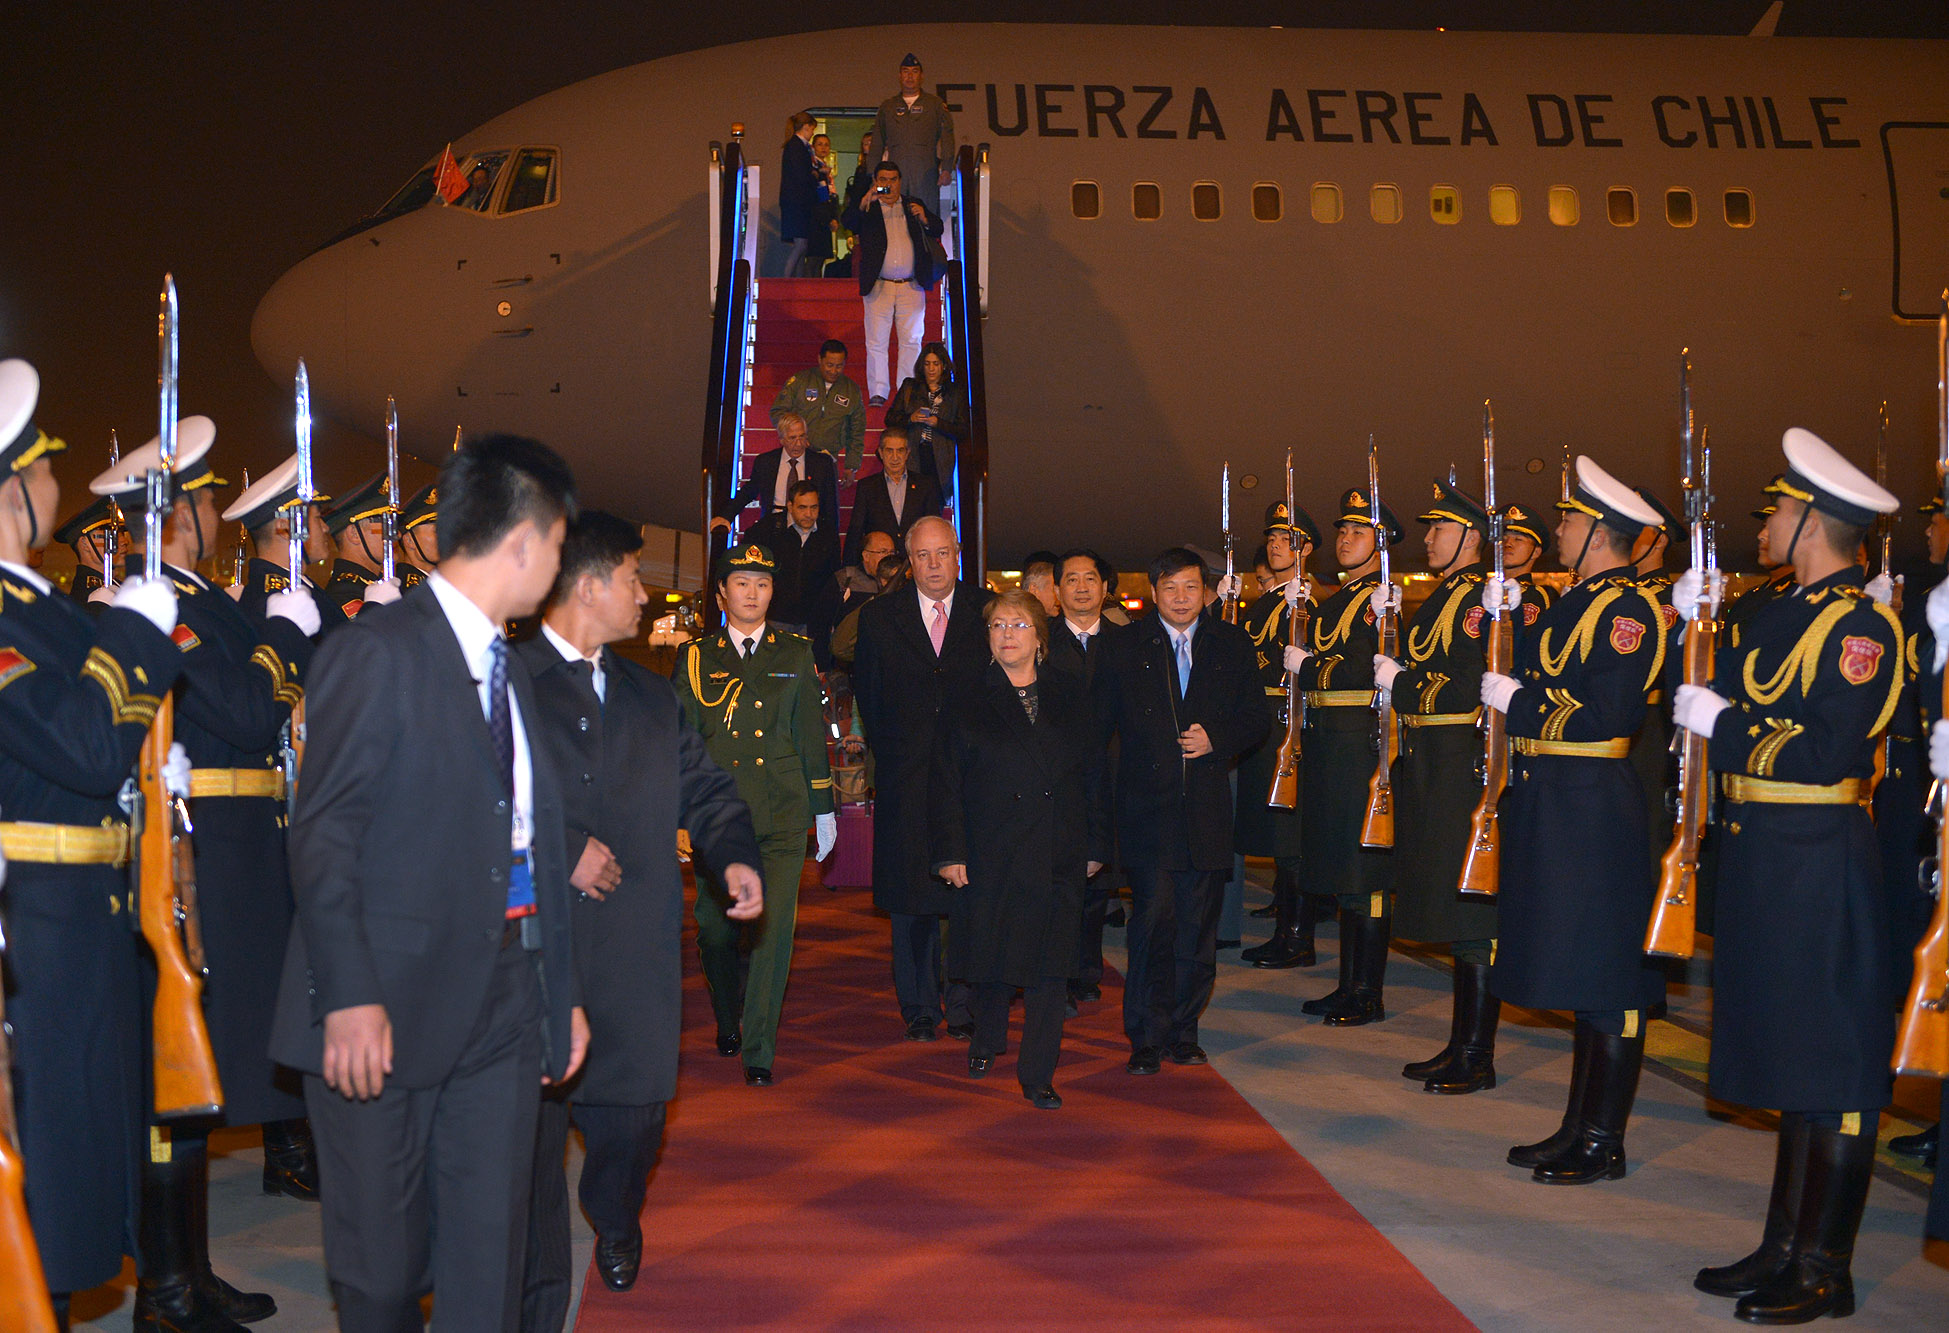 the chinese officials are escorted by foreign officials